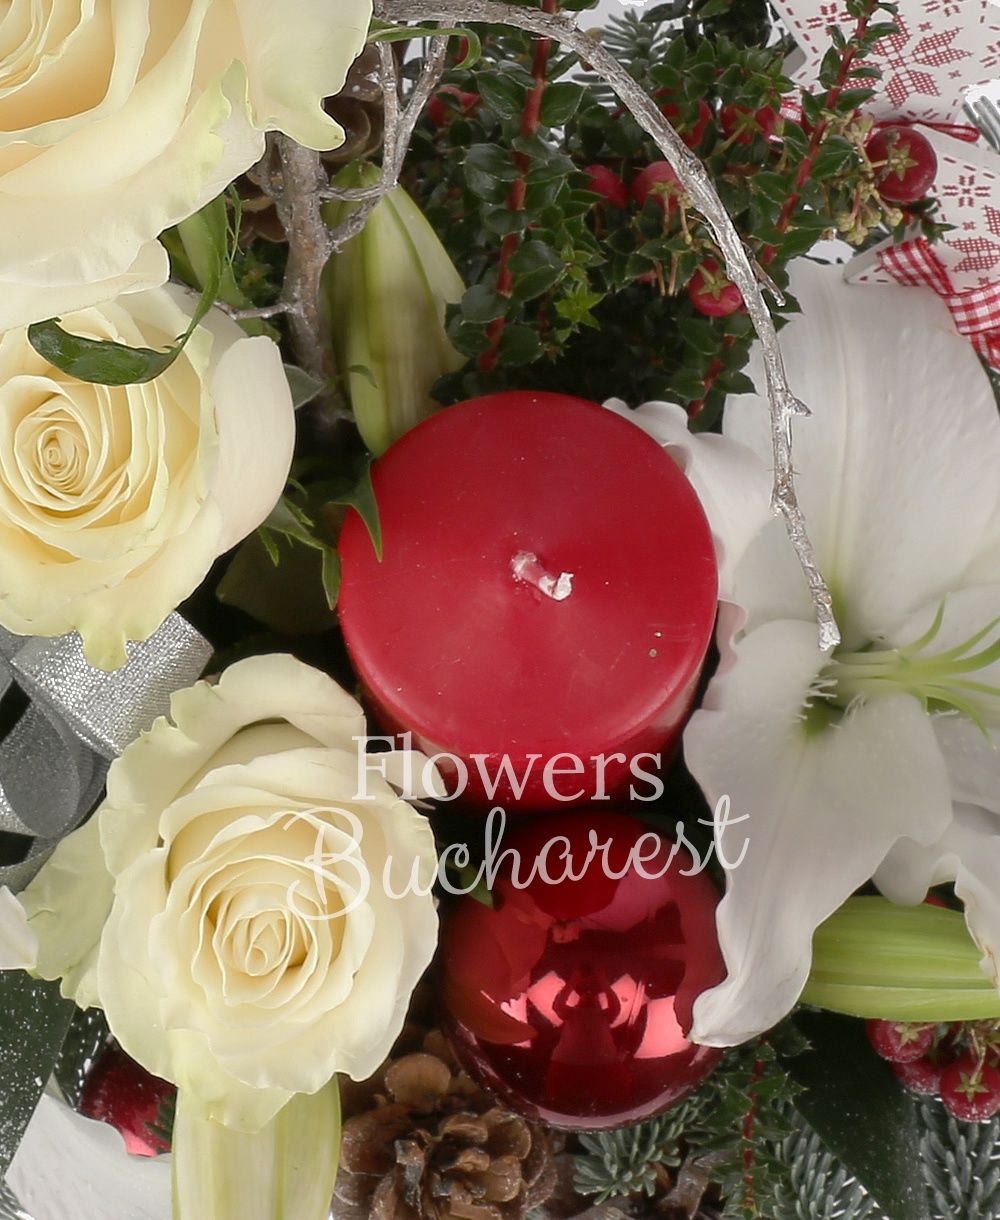 1 white lily, 3 white roses, 2 red hypericum, cones, globes, candle, greenery